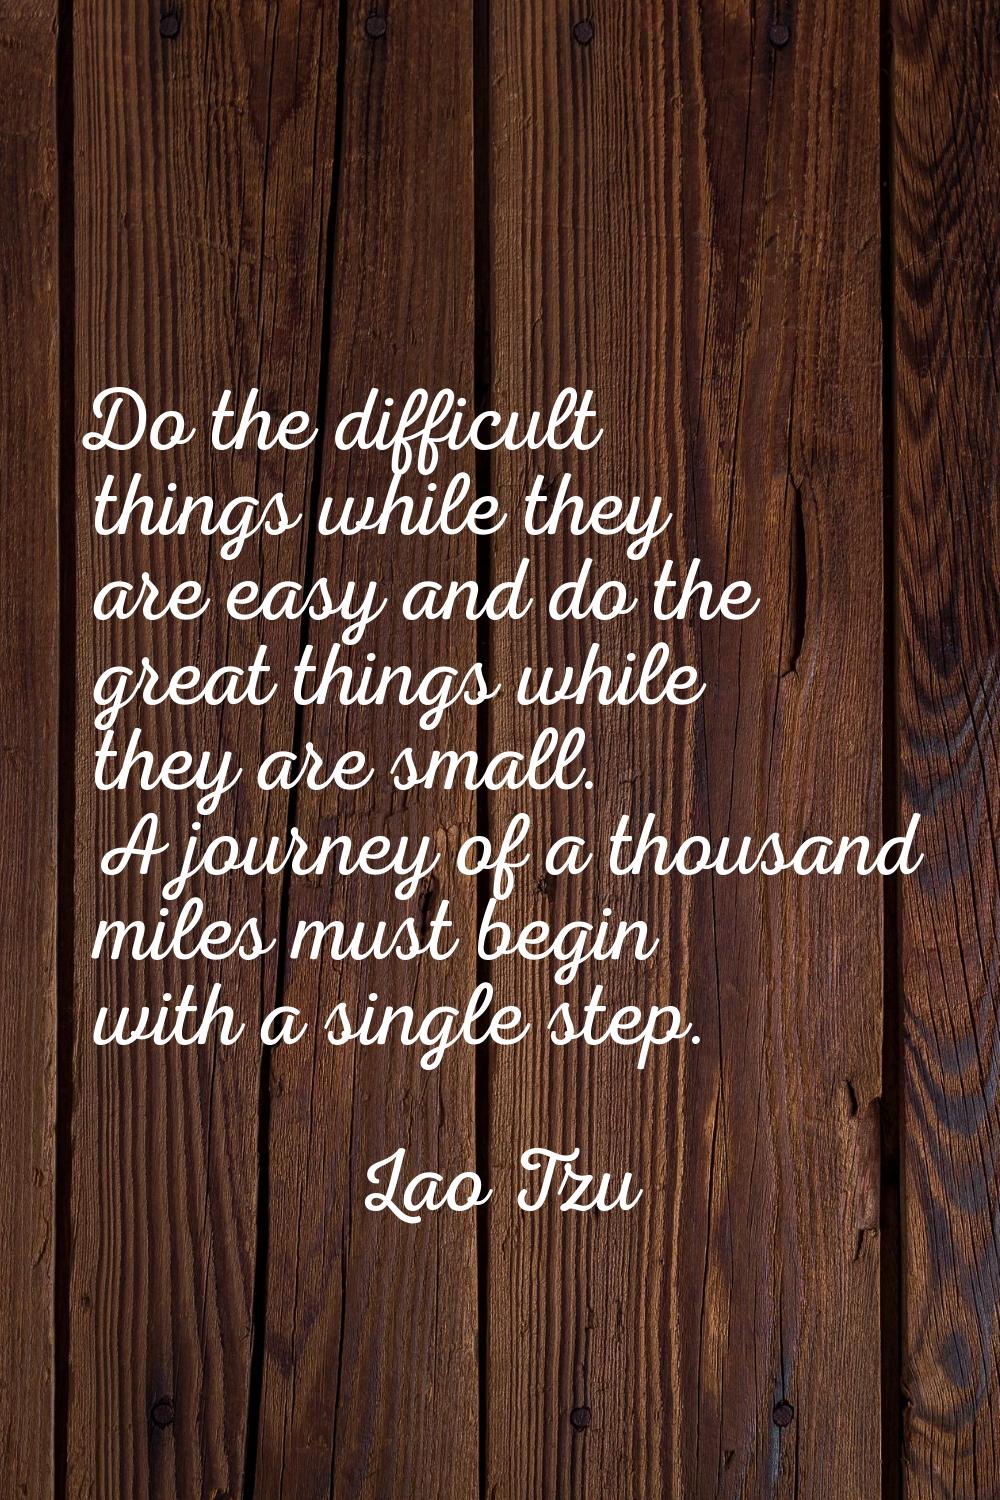 Do the difficult things while they are easy and do the great things while they are small. A journey